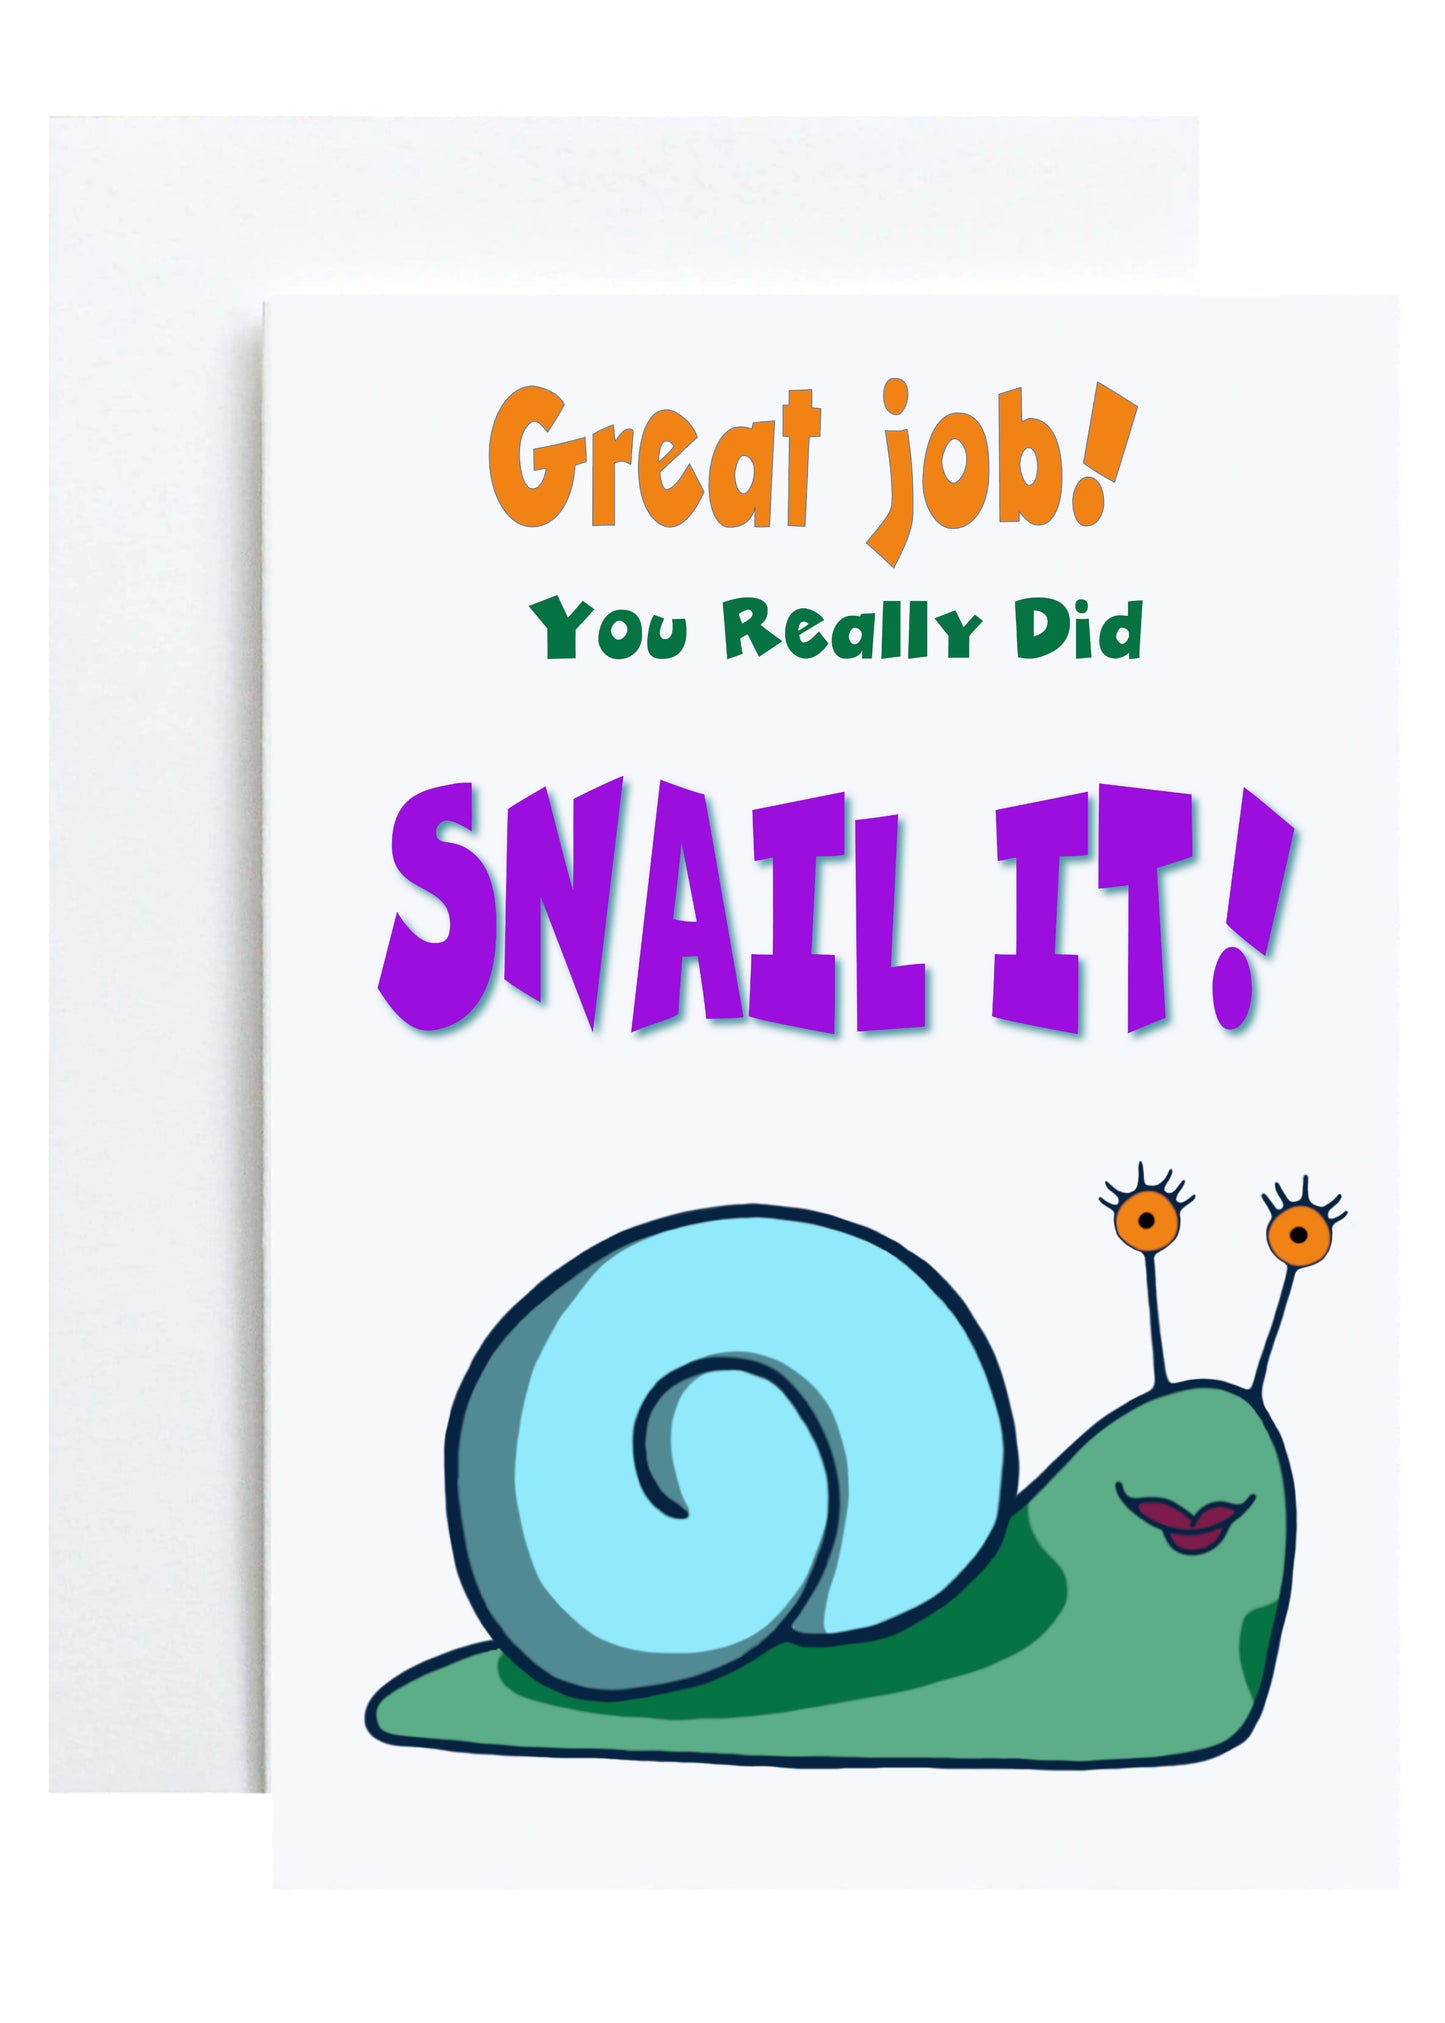 "You Really Did Snail It" Greeting Card (Congratulations, Good Job, Kids)